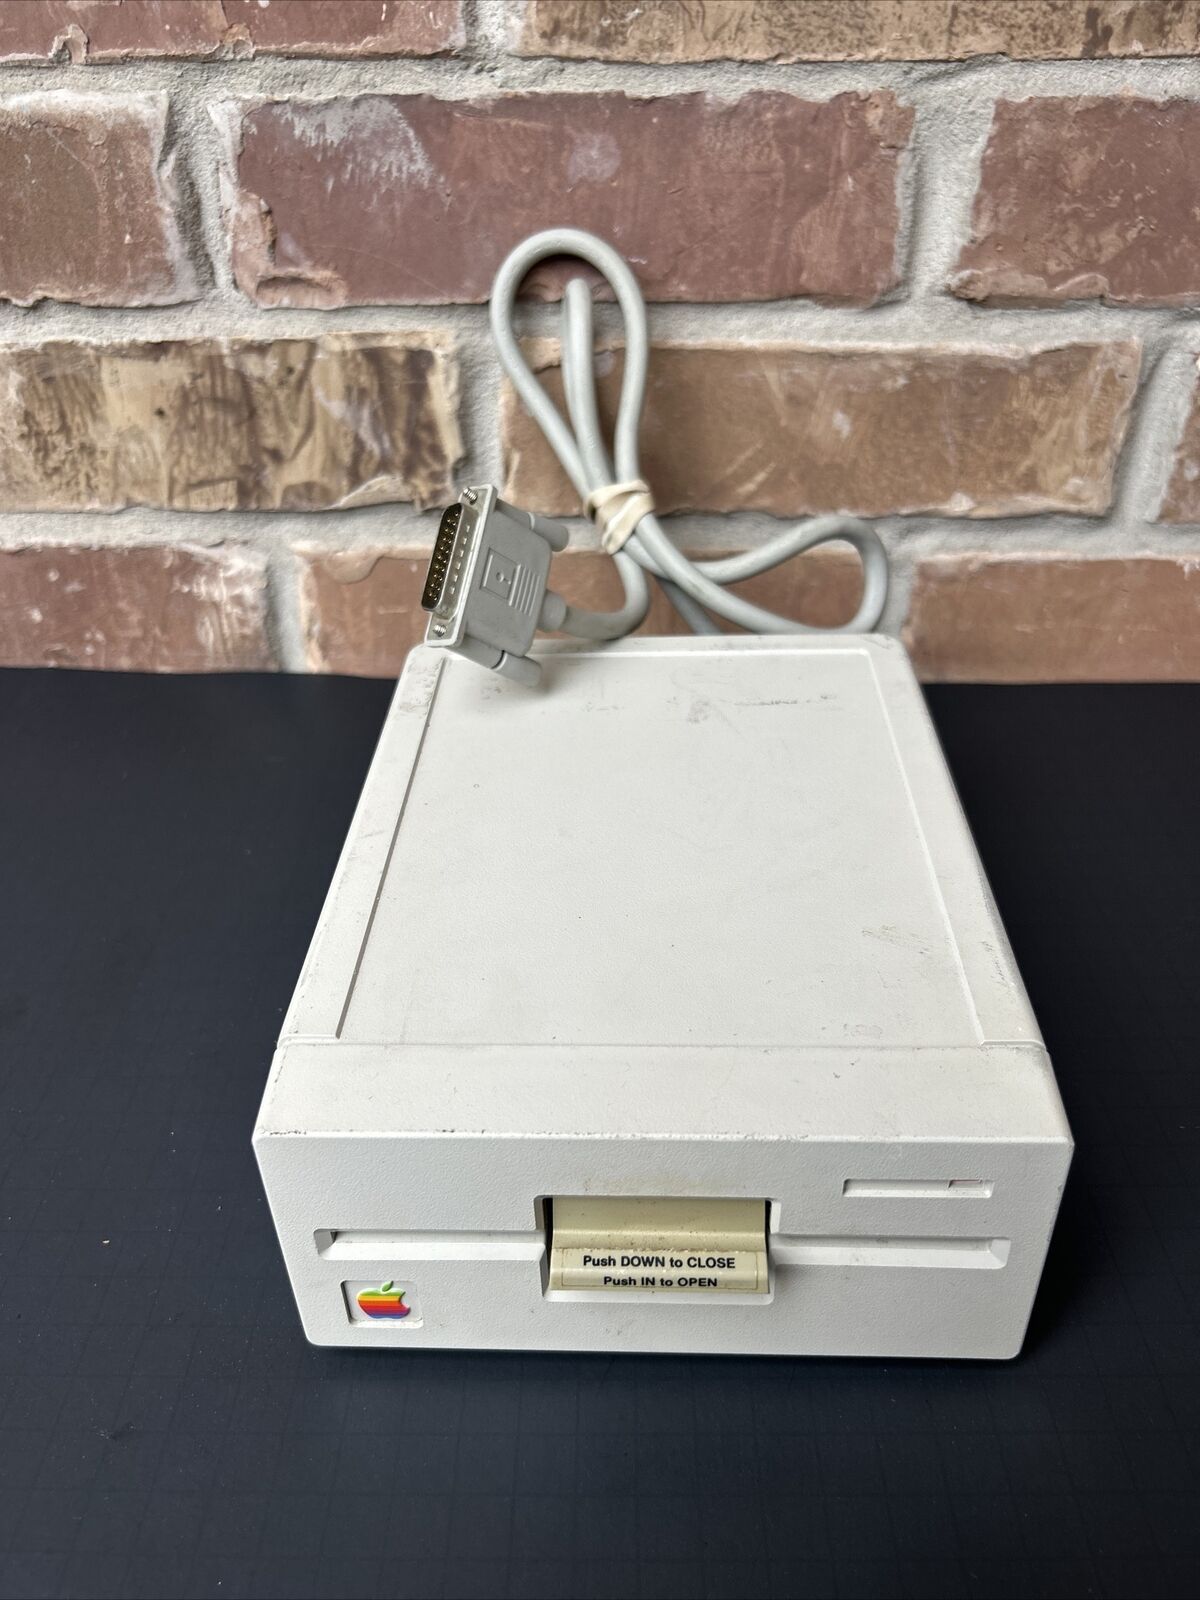 Apple II 5.25 Floppy Disk Drive Model A9M0107 Good Used Condition